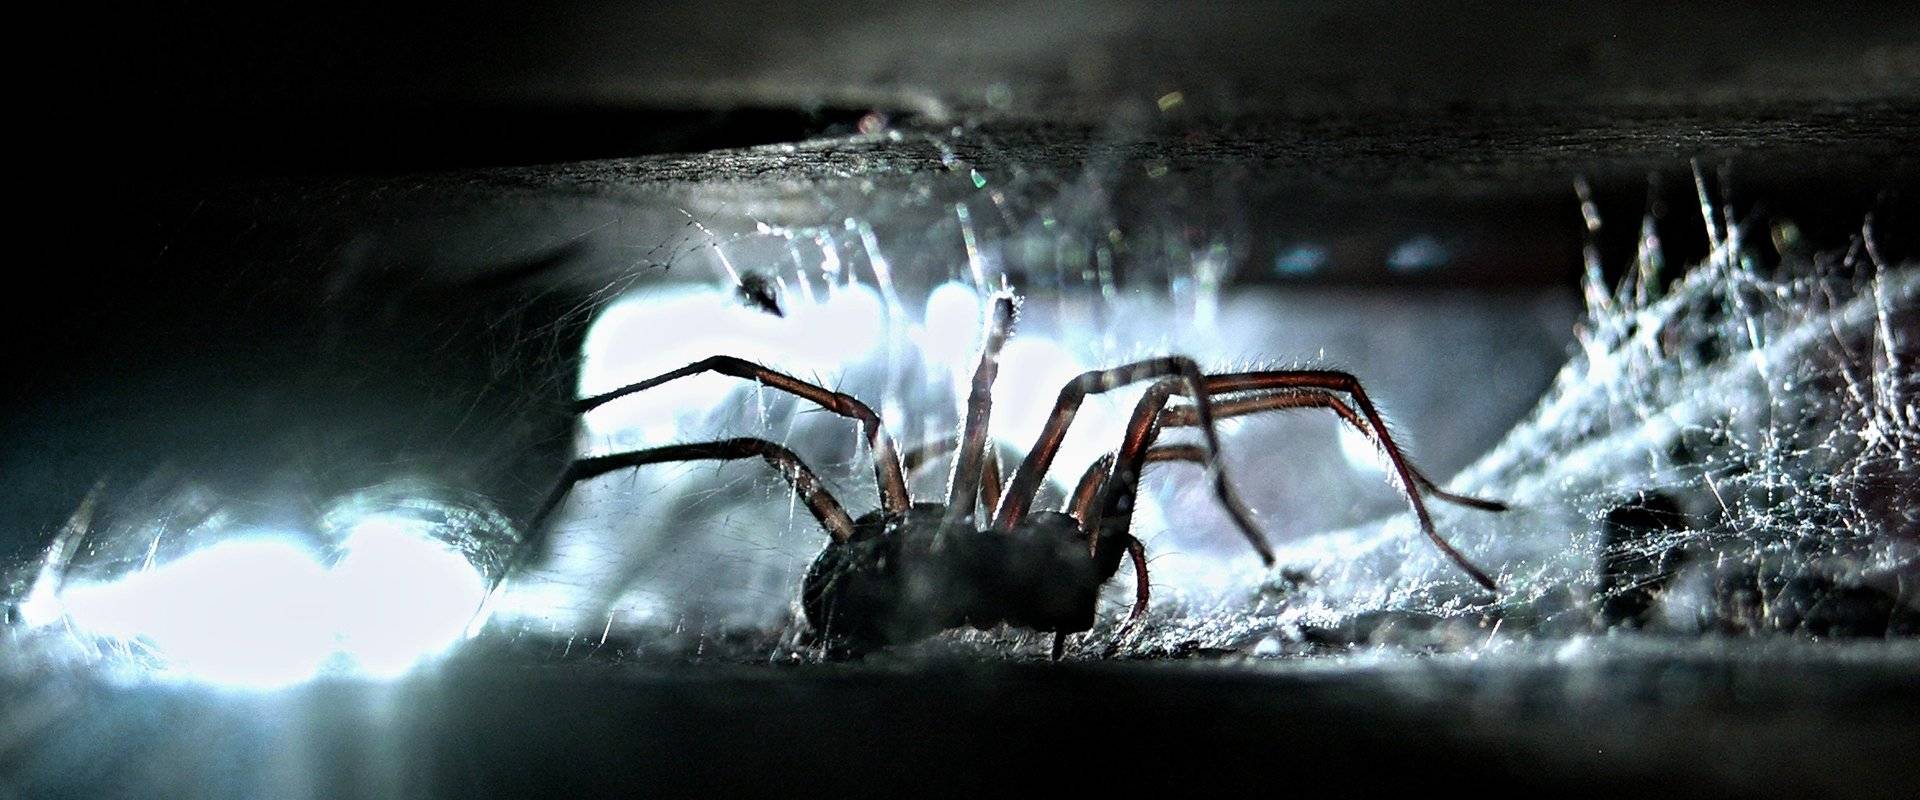 a house spider crawling in a basement